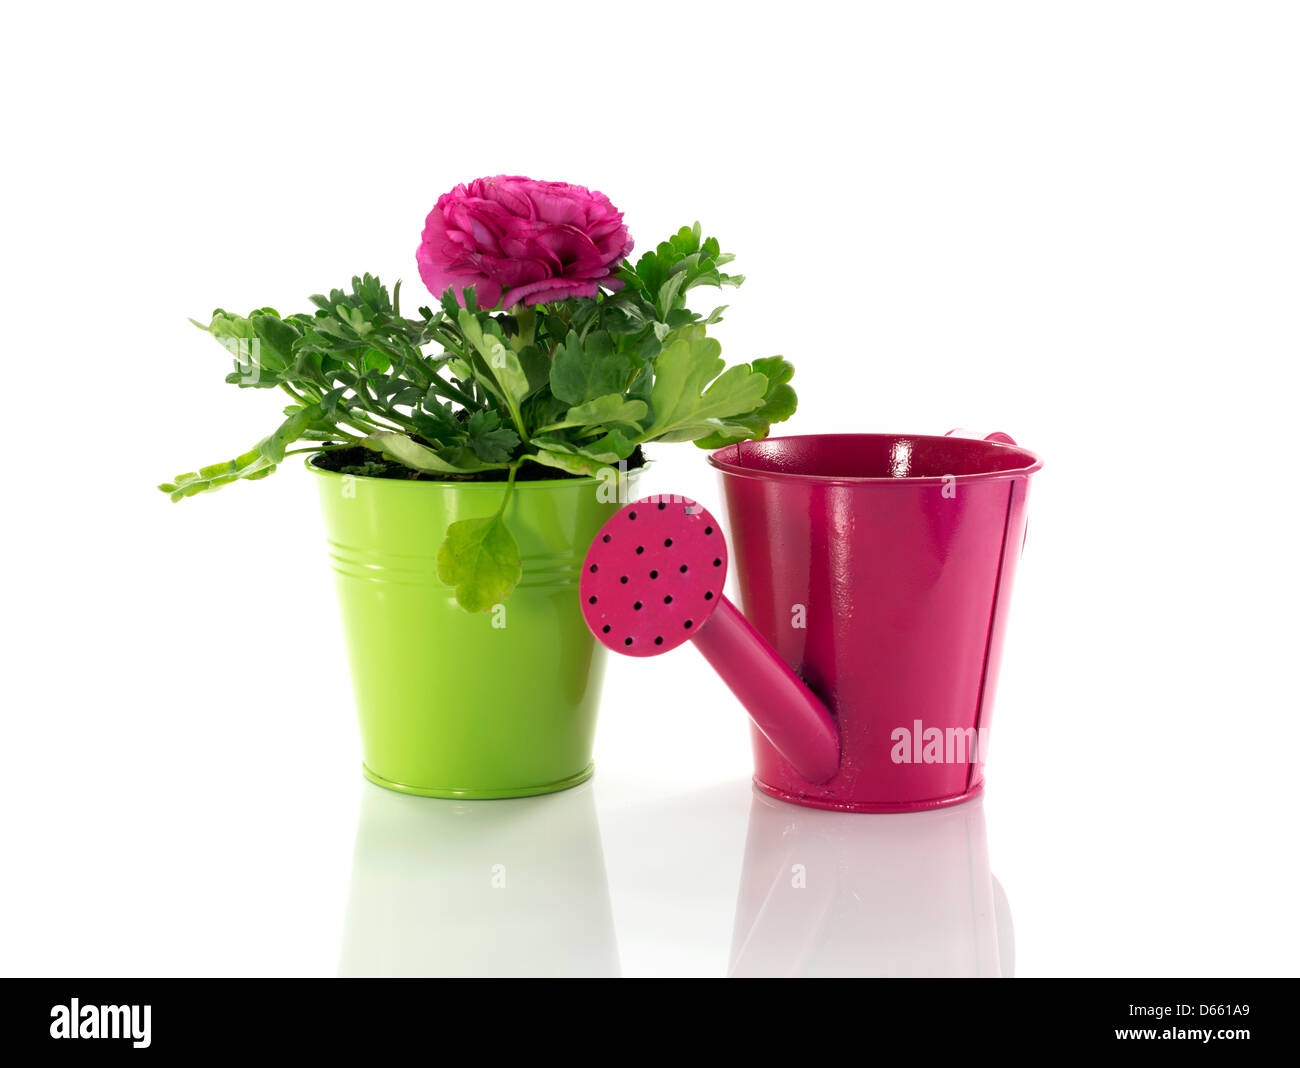 green bucket with spring flowers and watering can Stock Photo